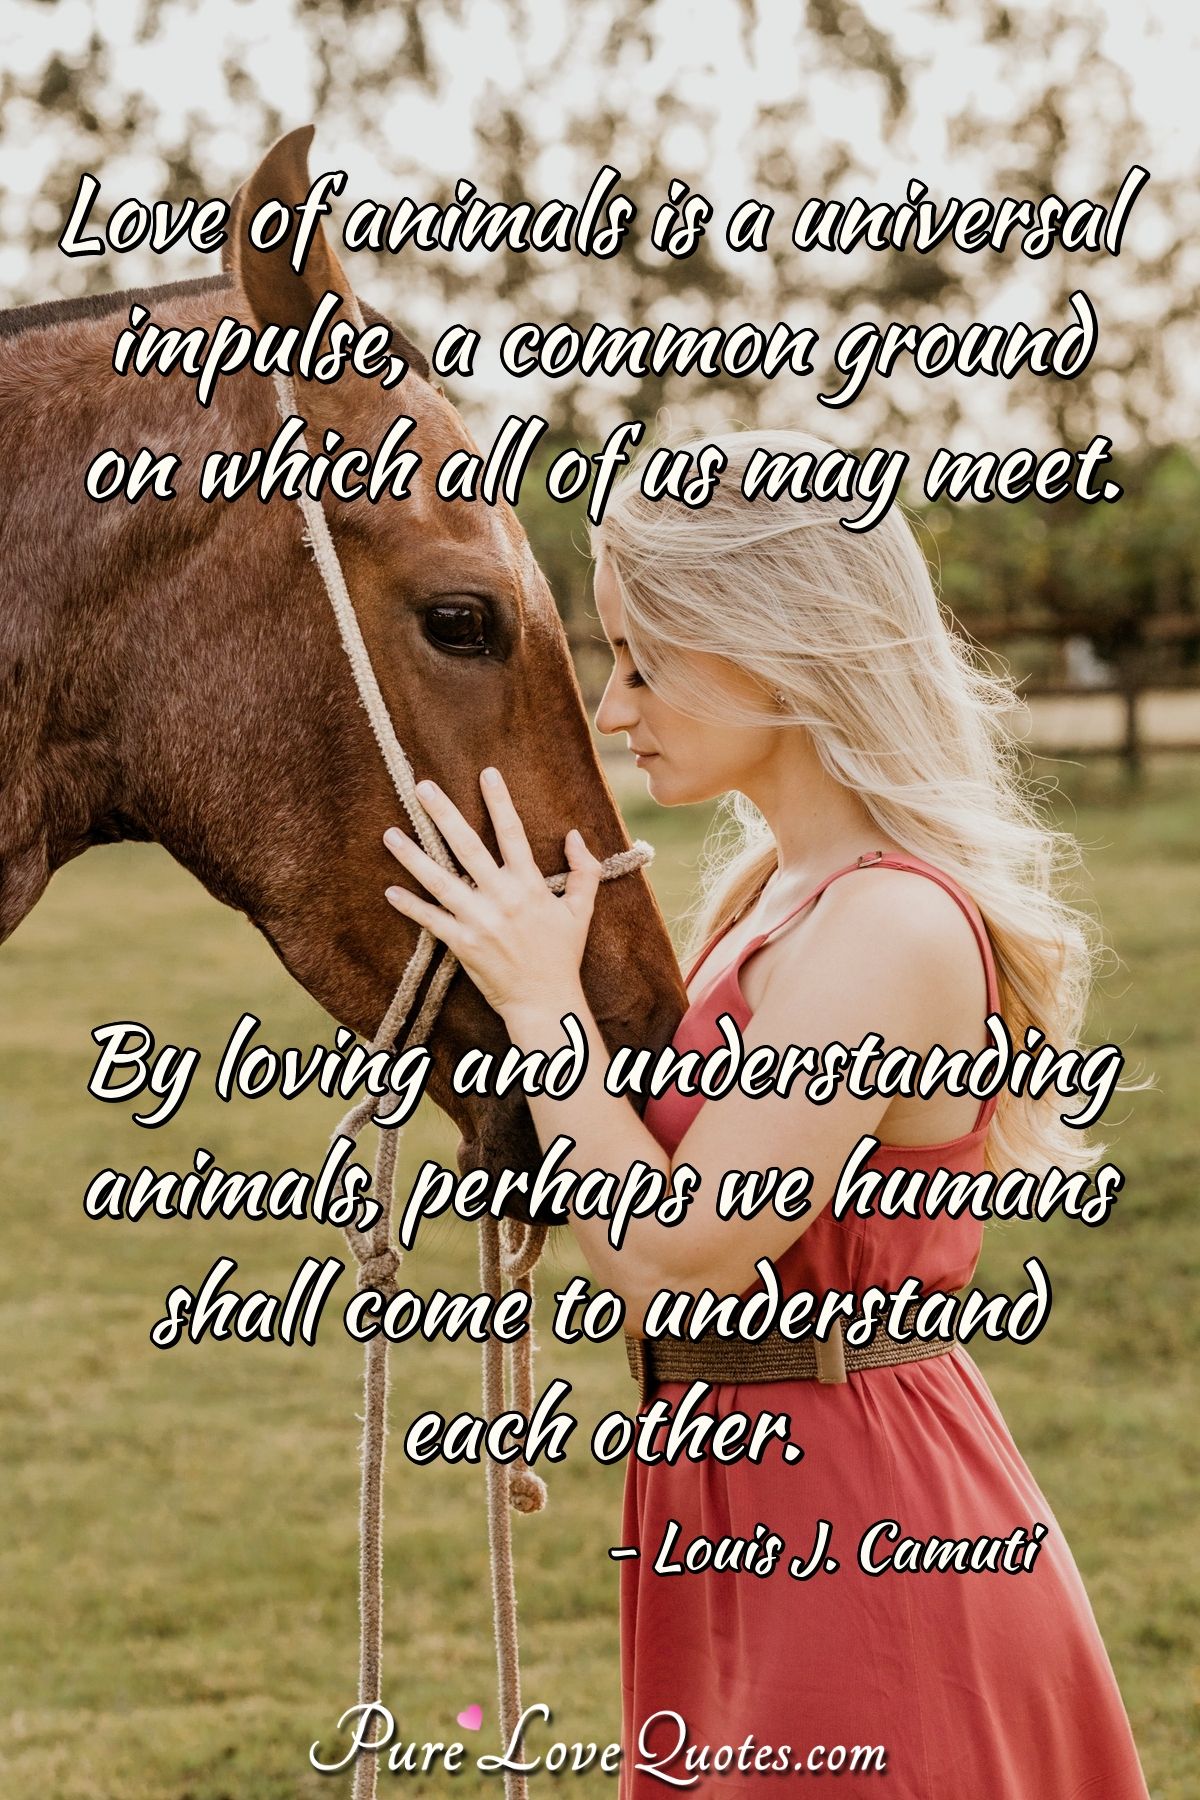 essay about love of animals